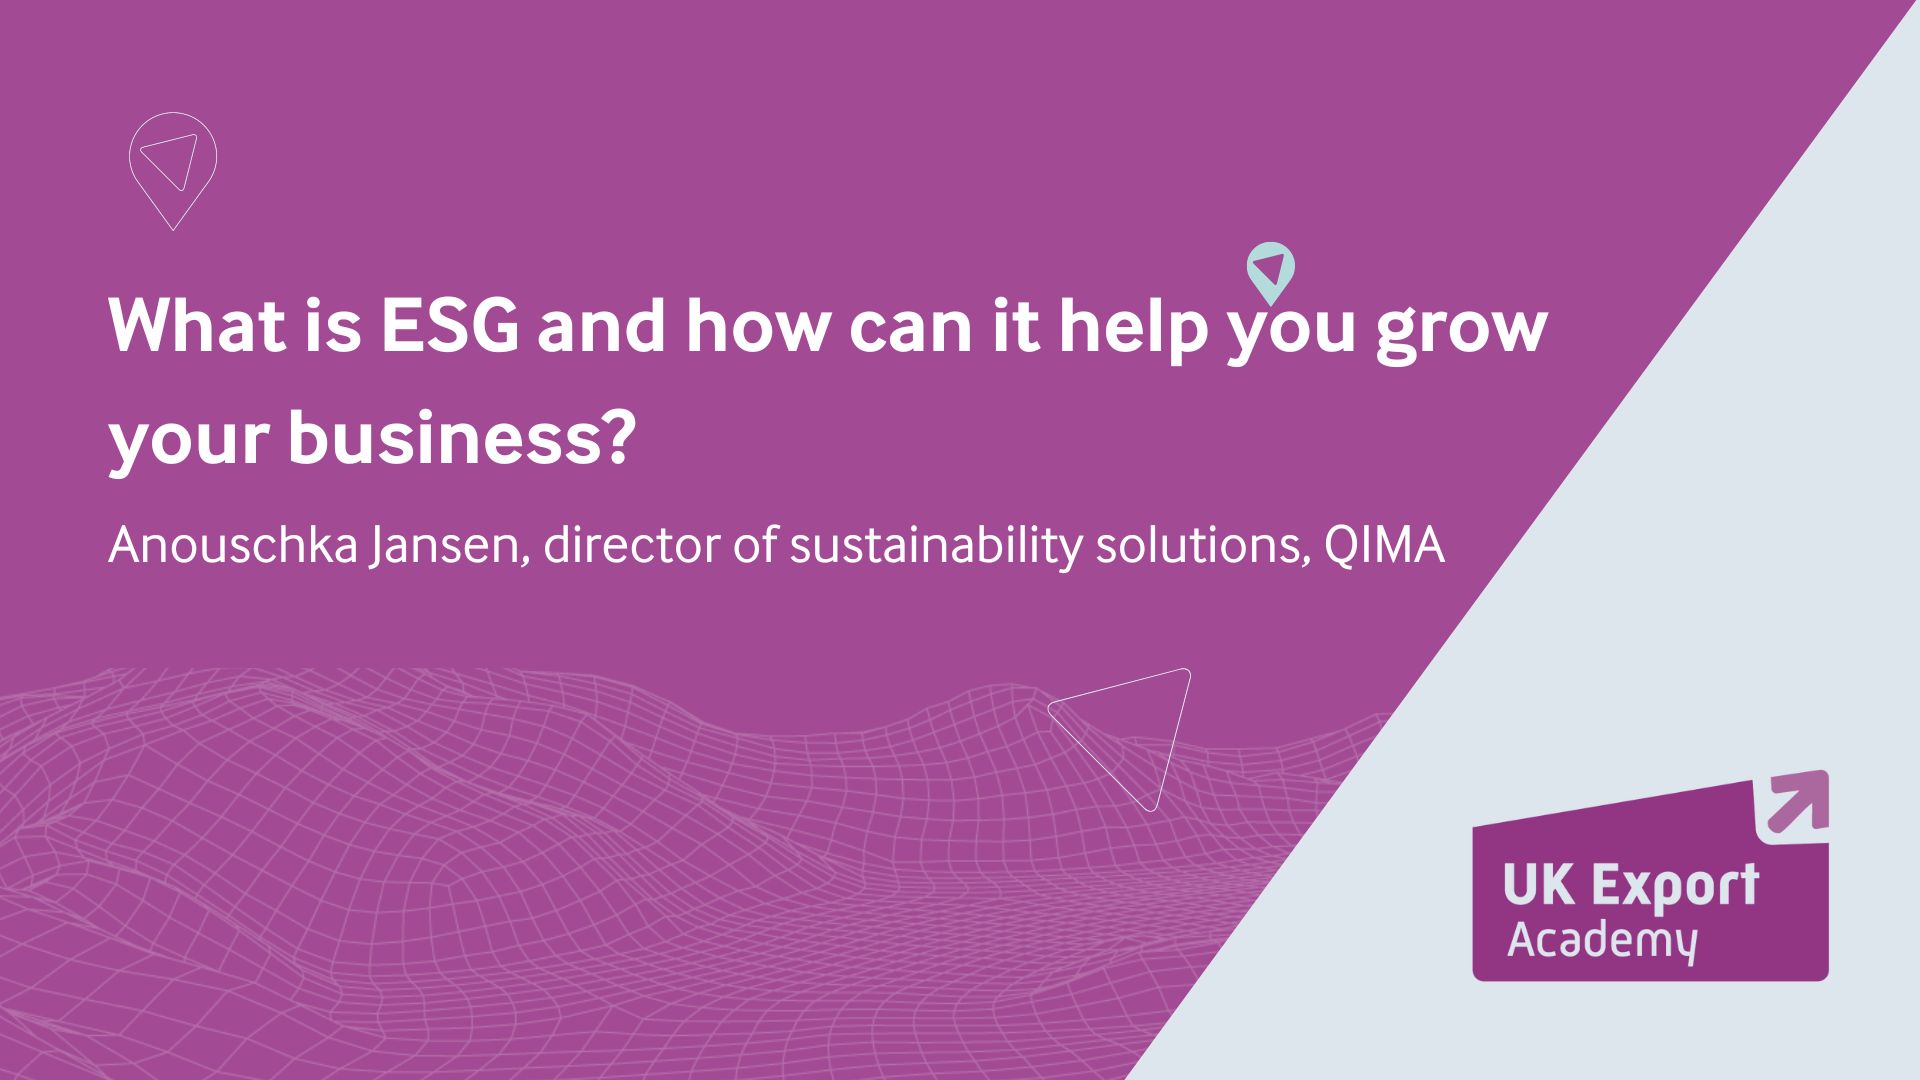 What is ESG and how can it help you grow your business?